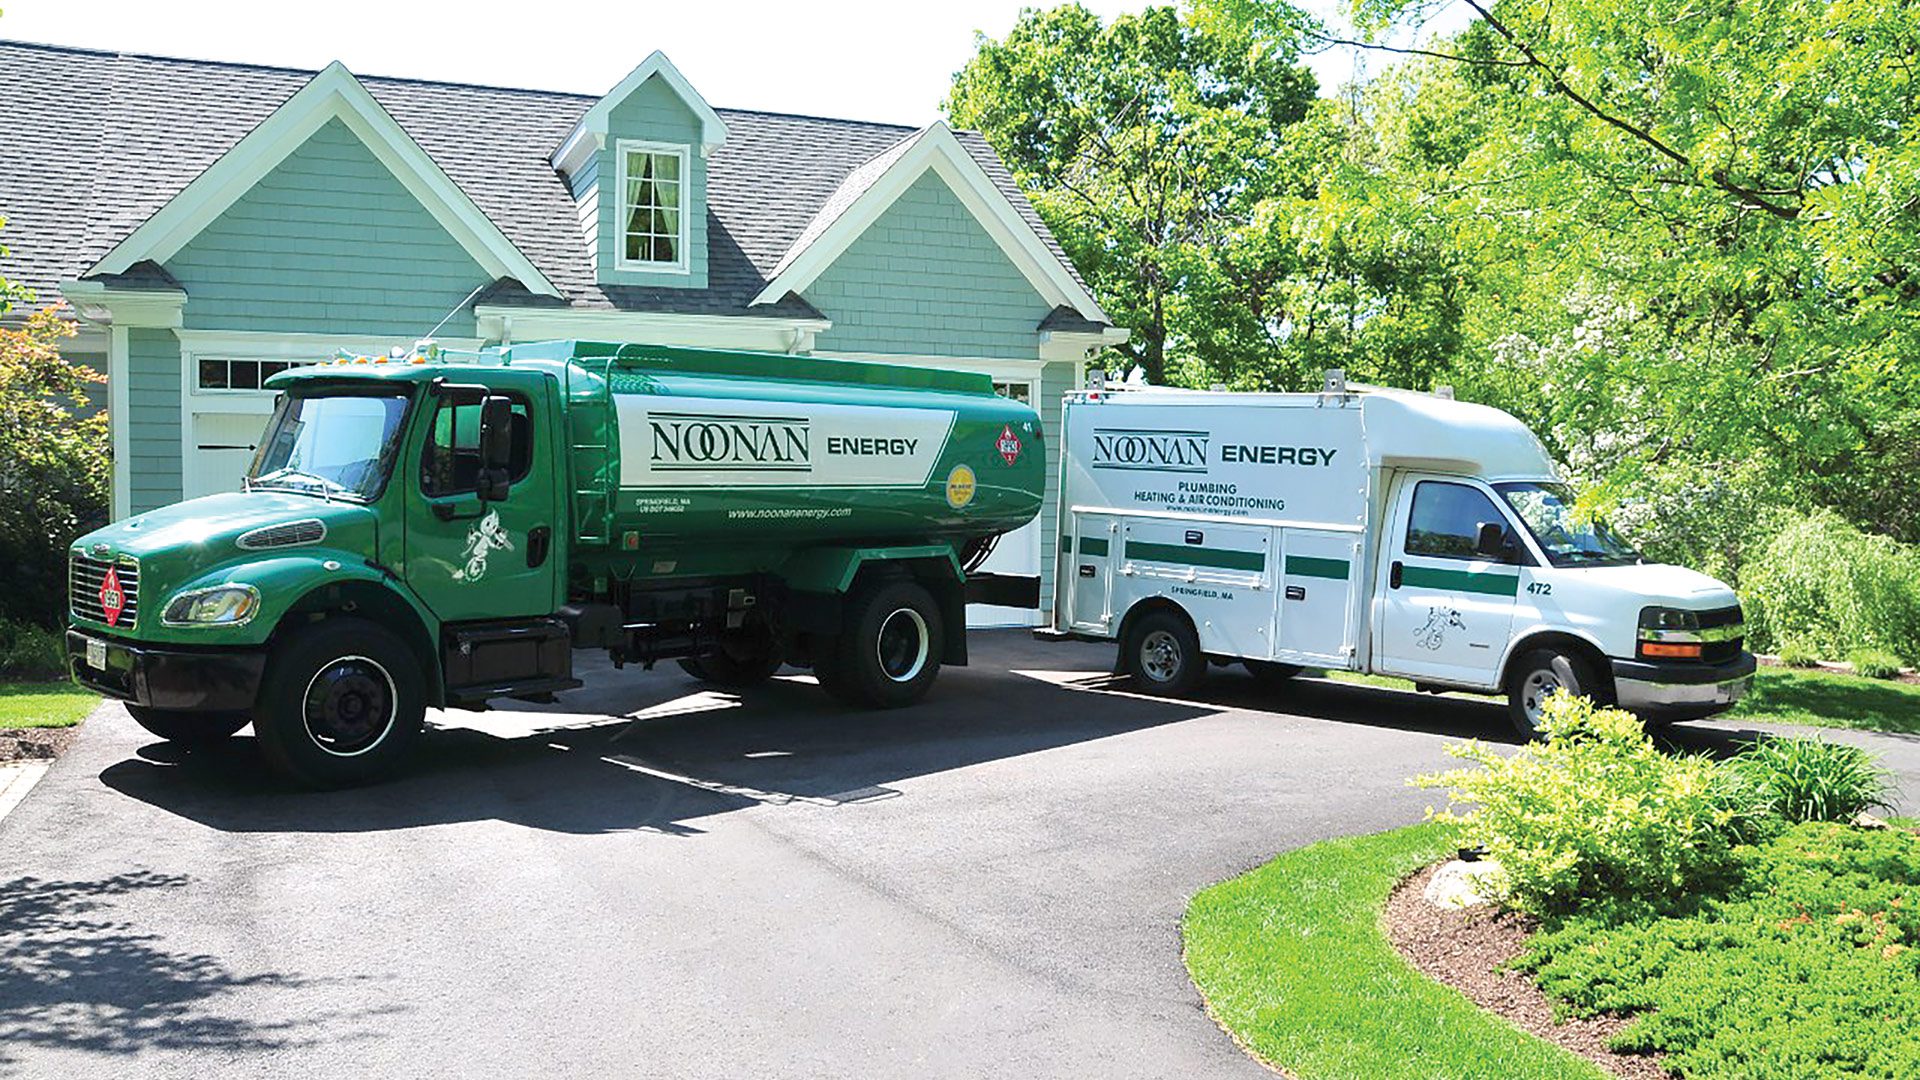 Noonan Energy is known for heating and HVAC services